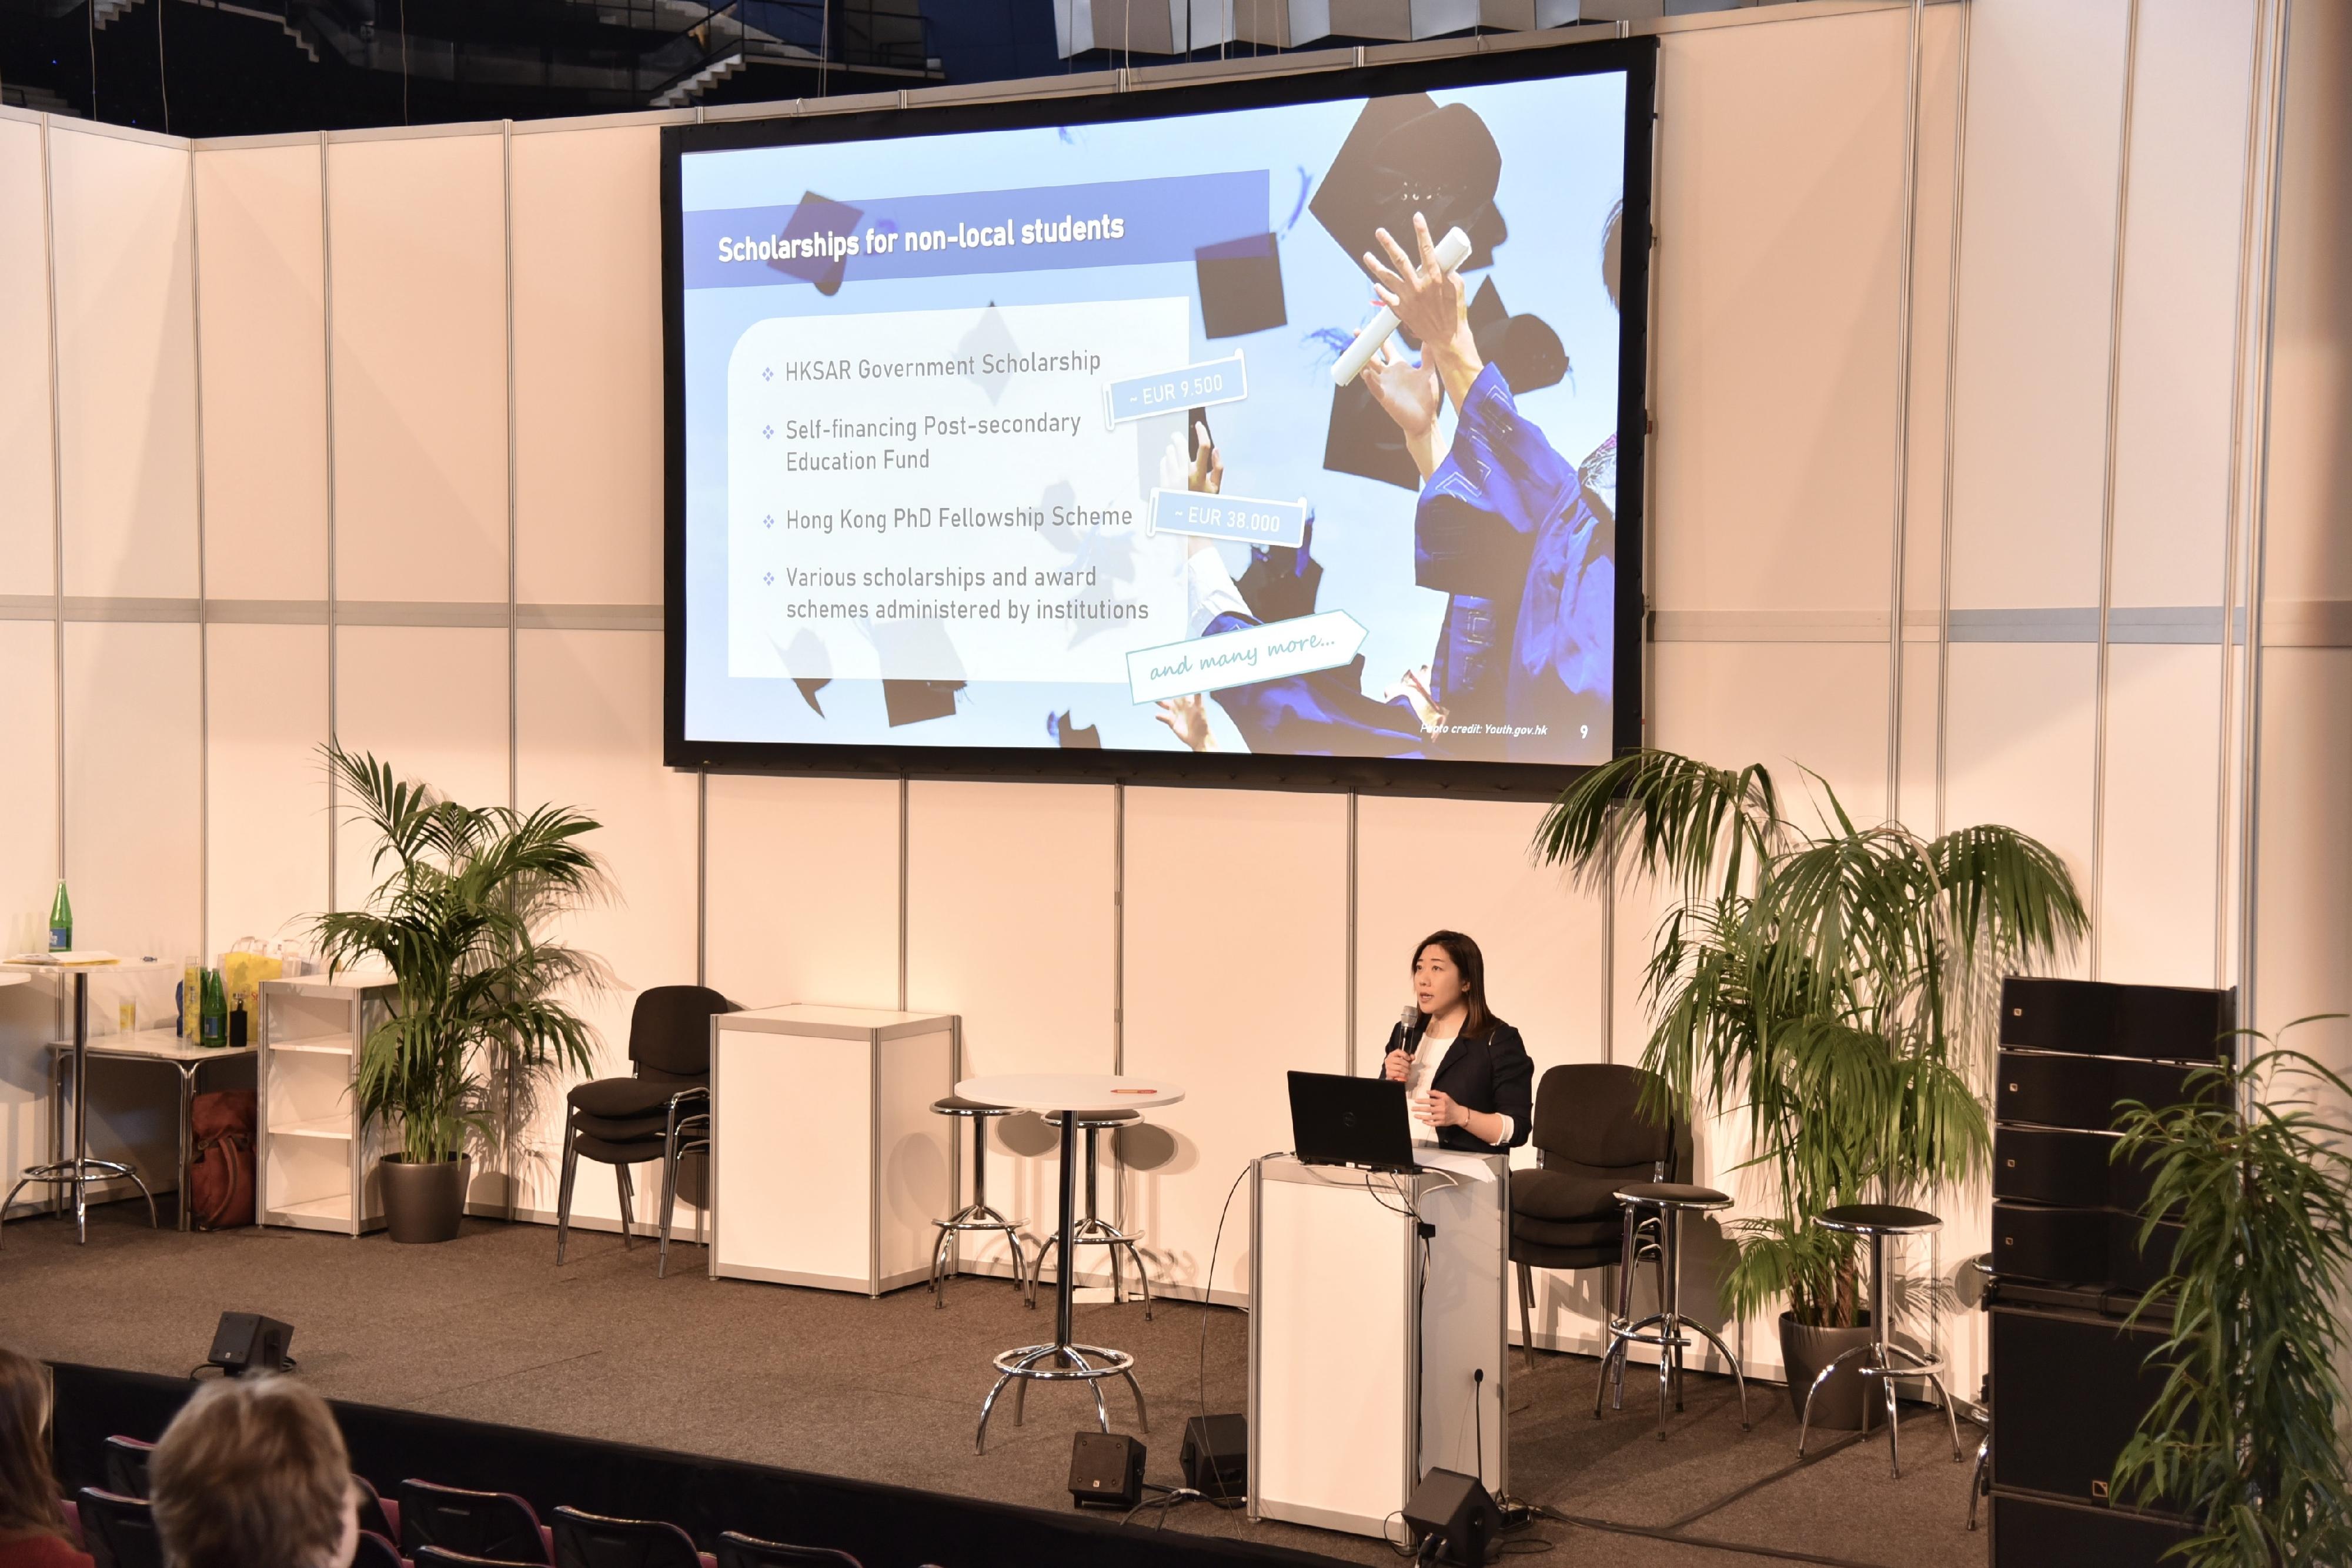 The Director of the Hong Kong Economic and Trade Office, Berlin, Ms Jenny Szeto, speaks at the Austrian education fair BeSt Vienna on March 2 (Vienna time).